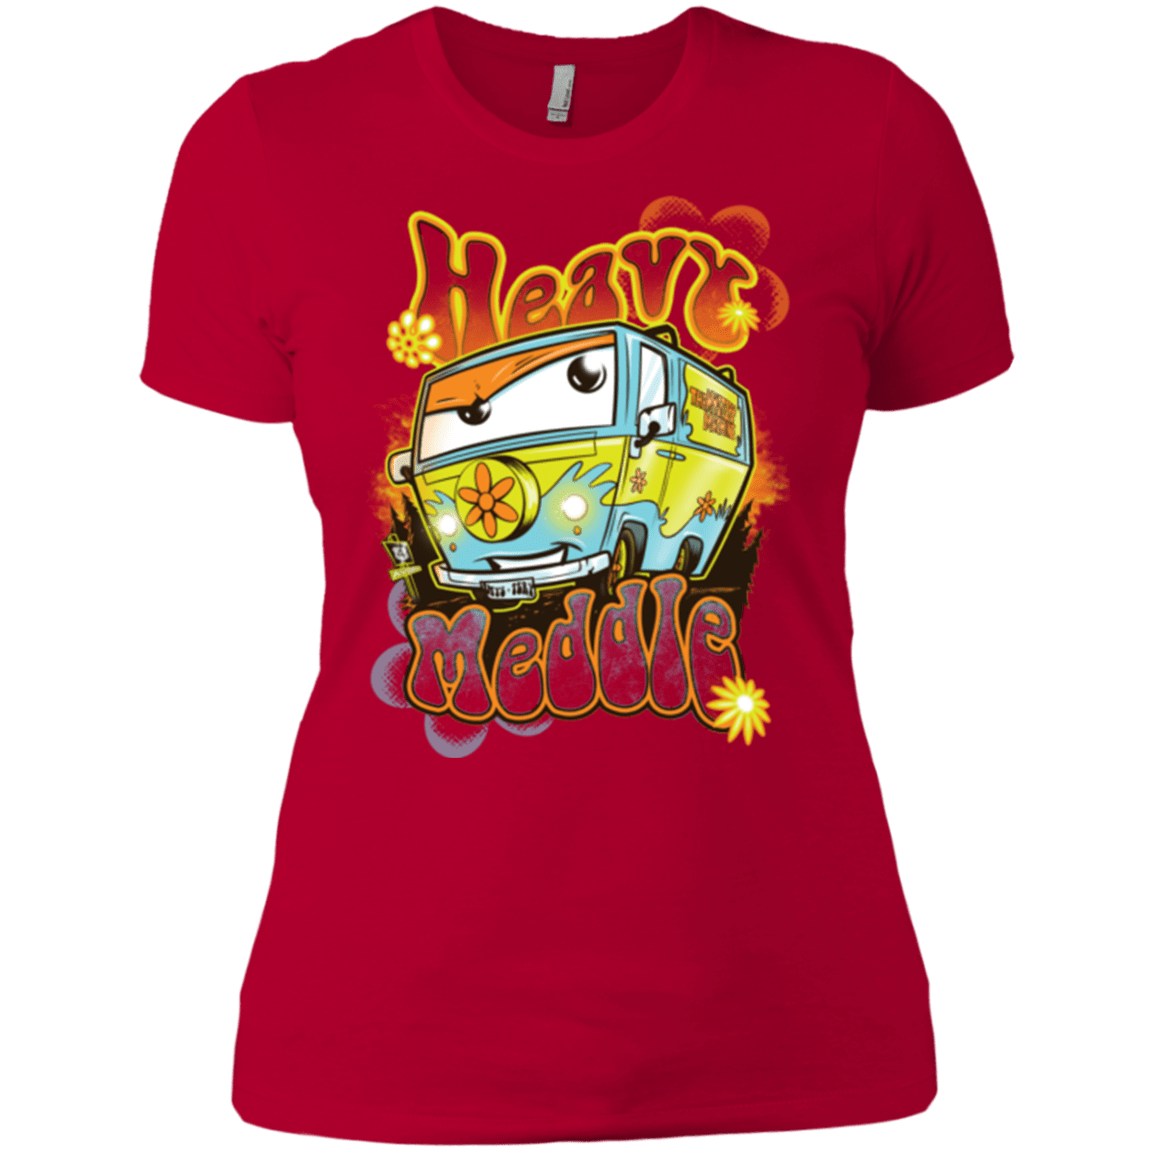 T-Shirts Red / X-Small Heavy Meddle Women's Premium T-Shirt